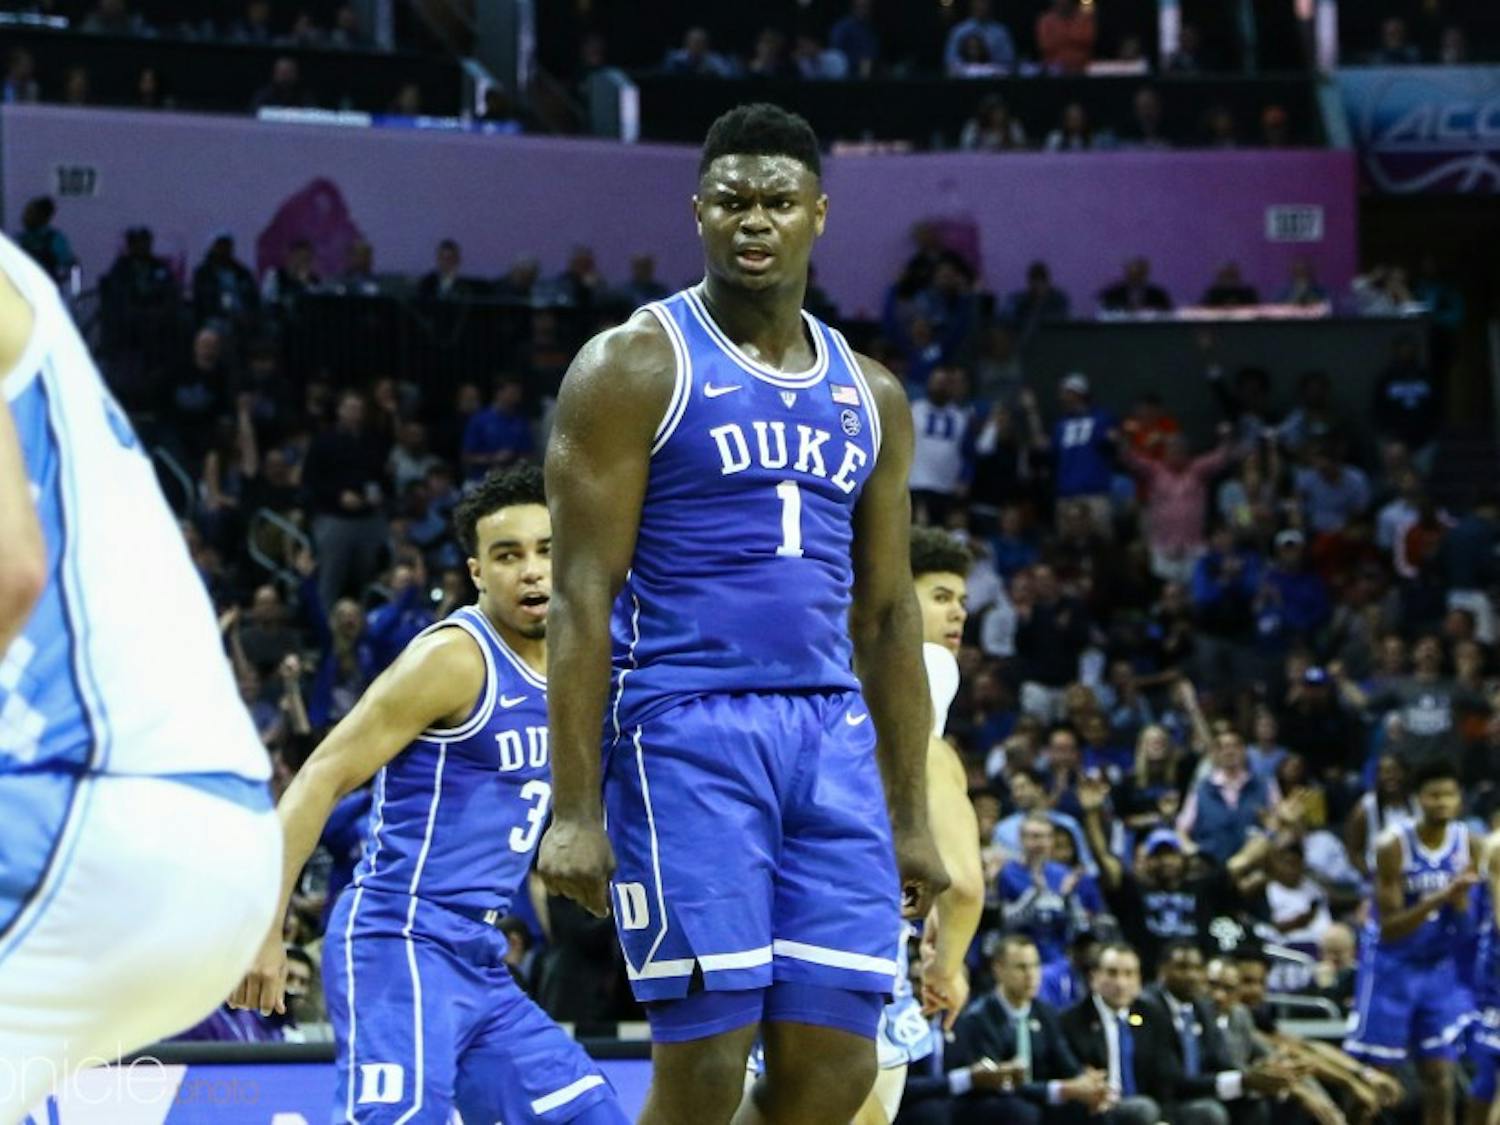 Zion Williamson was a man amongst boys against the Tar Heels, as he scored 31 points and brought down 11 boards.